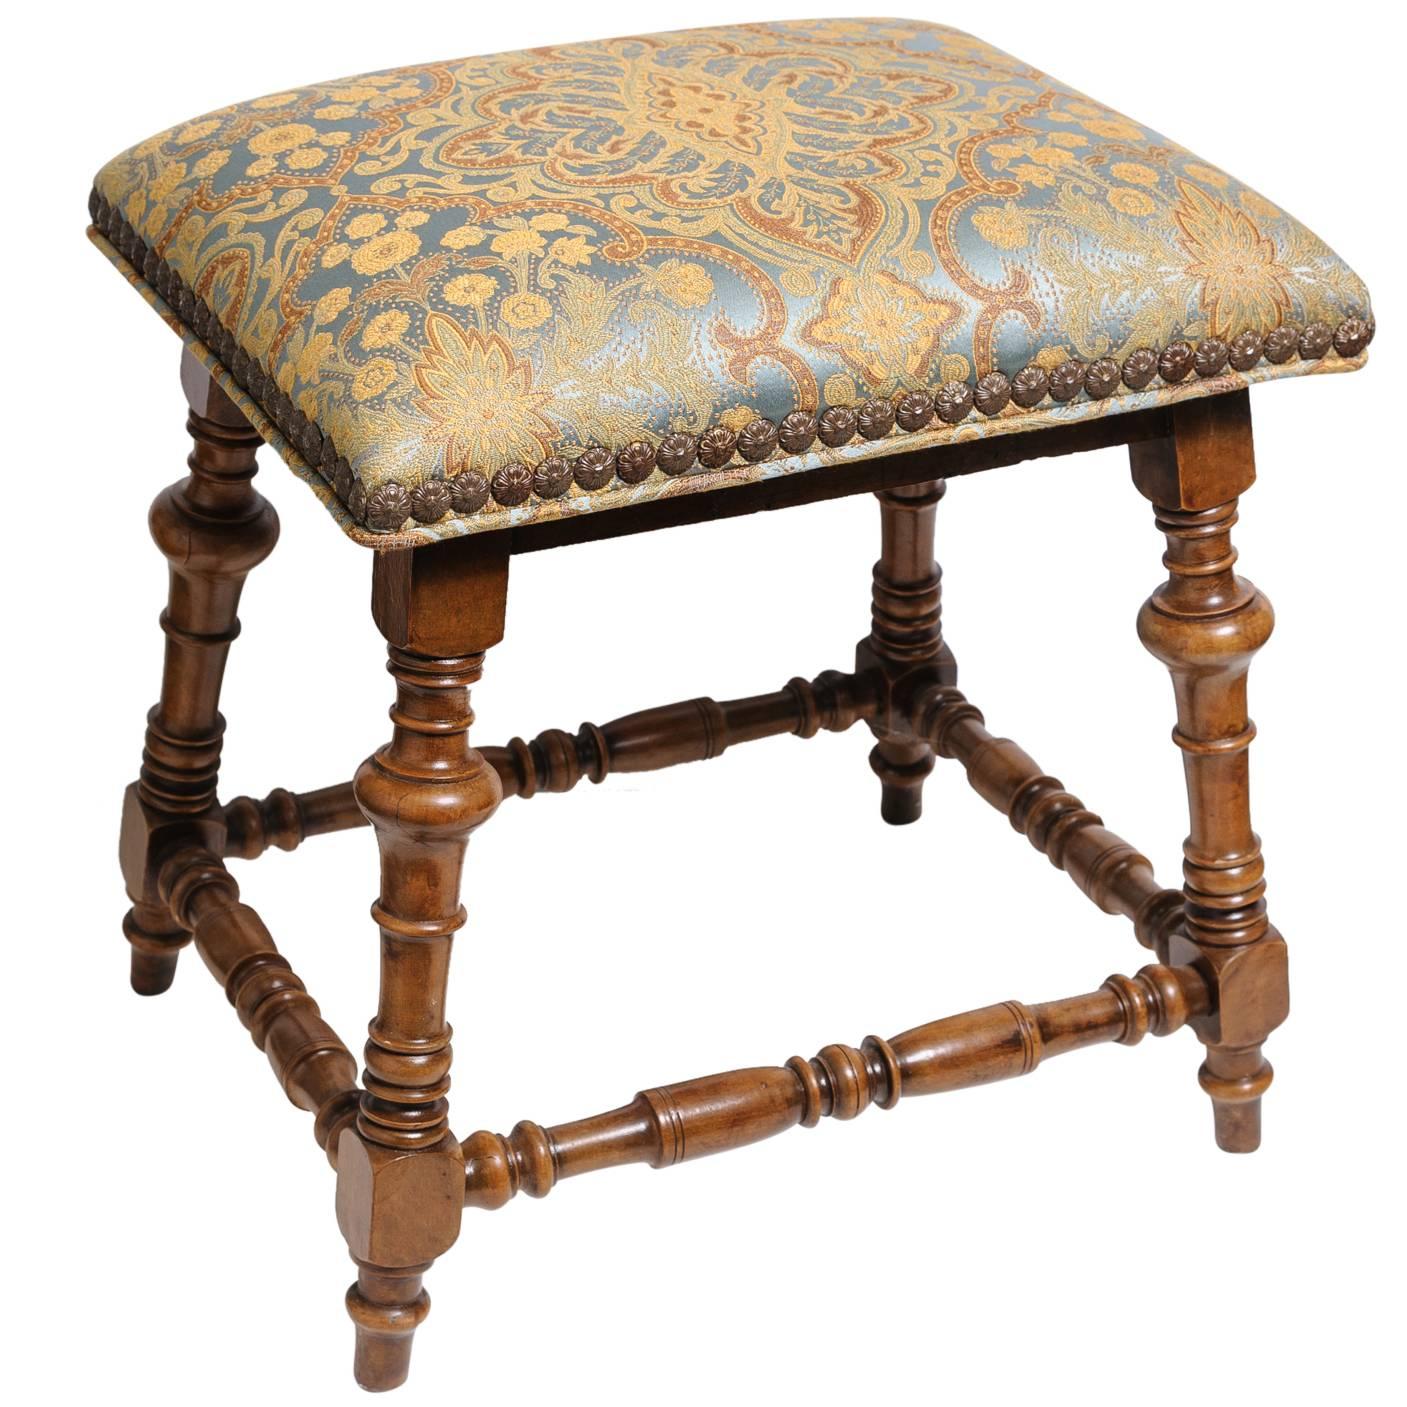 Jacobean Style Stool with Gold and Blue Damask Fabric